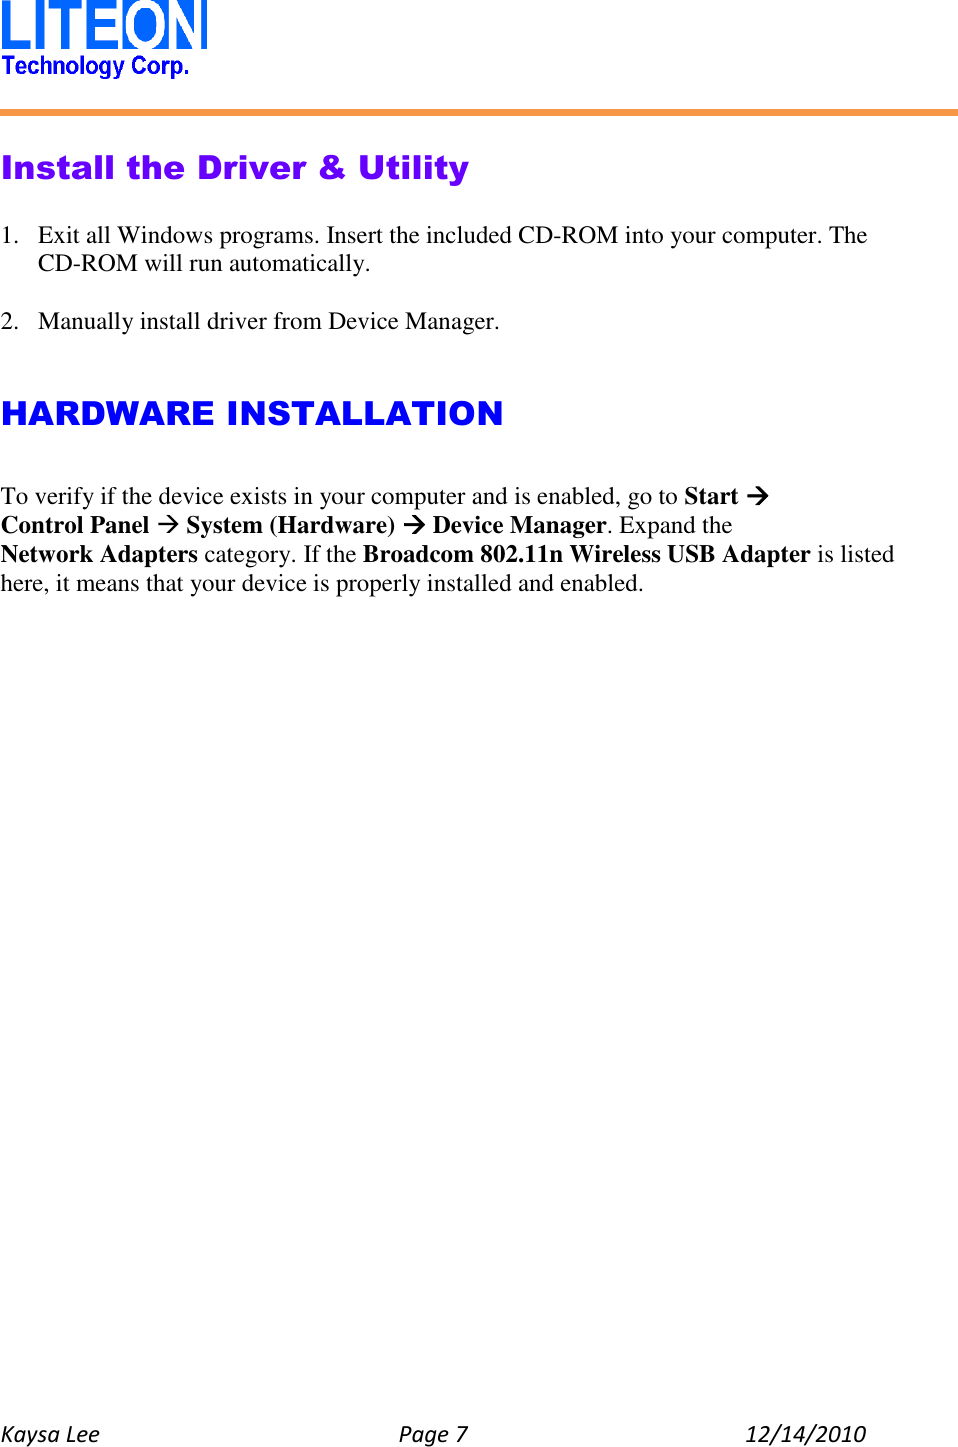   Kaysa Lee  Page 7  12/14/2010    Install the Driver &amp; Utility  1. Exit all Windows programs. Insert the included CD-ROM into your computer. The CD-ROM will run automatically.  2. Manually install driver from Device Manager.   HARDWARE INSTALLATION  To verify if the device exists in your computer and is enabled, go to Start  Control Panel  System (Hardware)  Device Manager. Expand the Network Adapters category. If the Broadcom 802.11n Wireless USB Adapter is listed here, it means that your device is properly installed and enabled.    